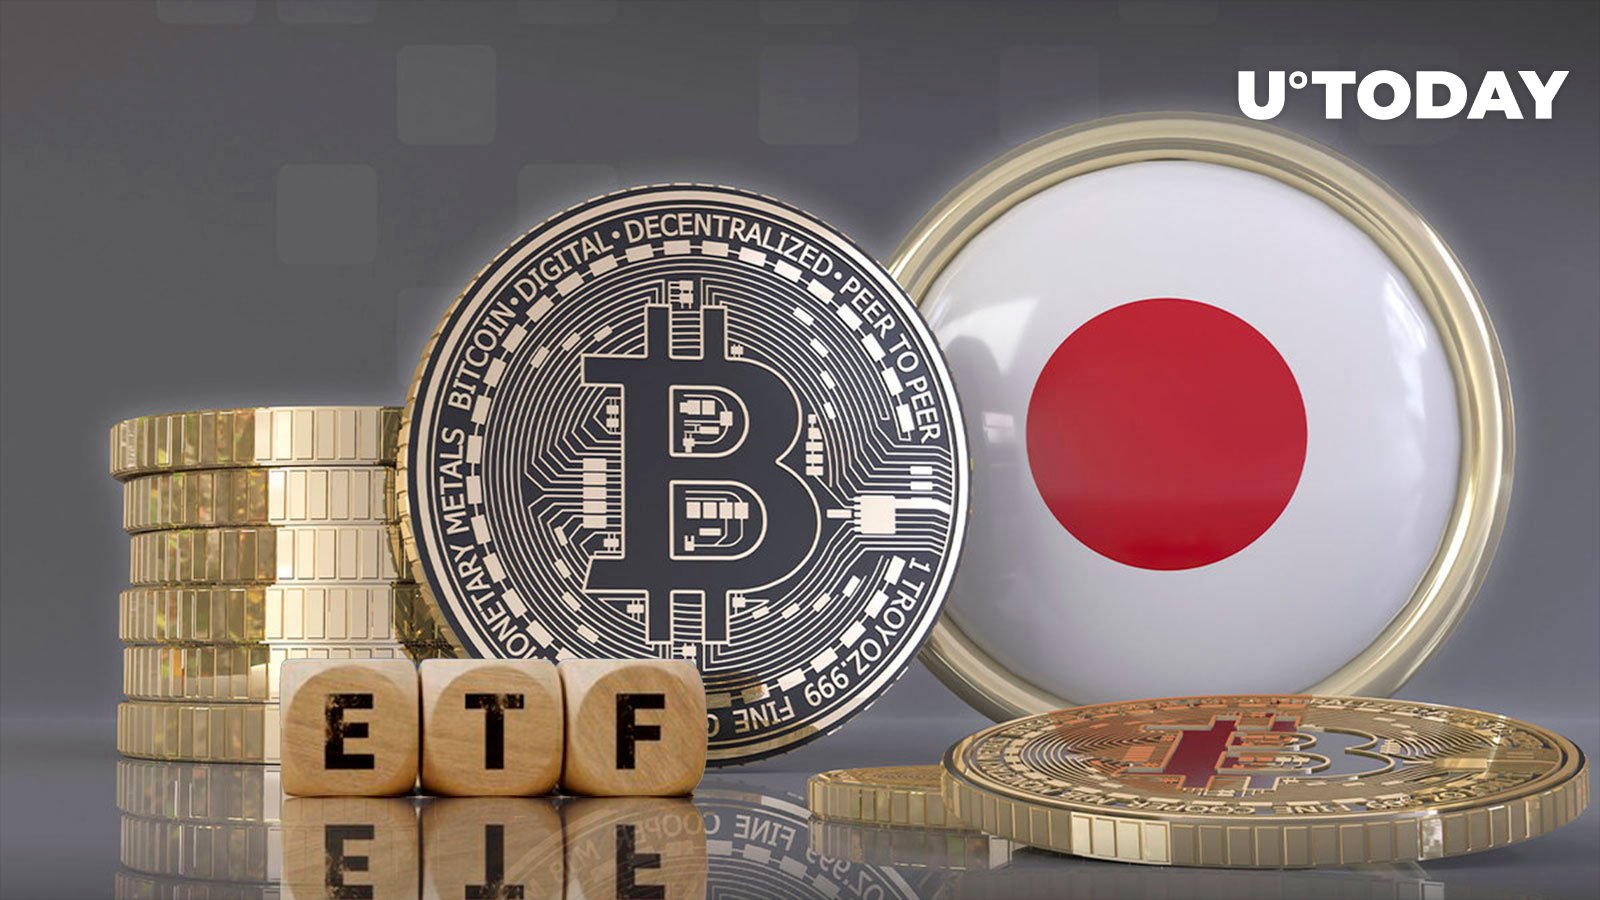 Japanese Financial Giant Preparing for Approval of Bitcoin ETFs